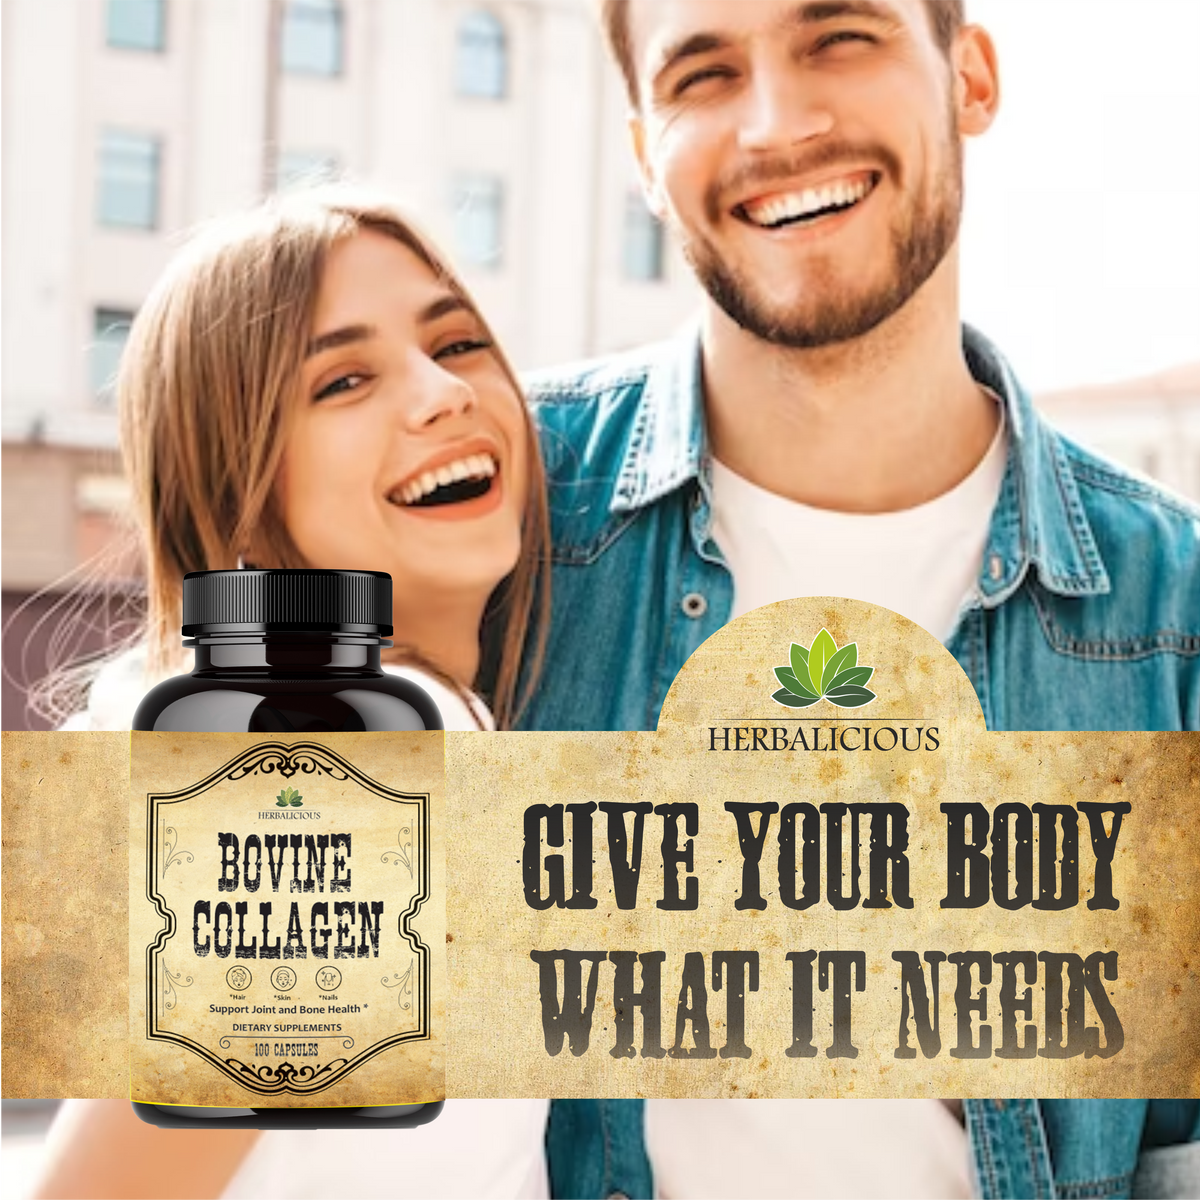 Bovine Collagen Supplements for Men and Women I Hydrolyzed Grass Fed Bovine Collagen Peptides Dietary Supplement for Joint, Nerve & Bone Support 